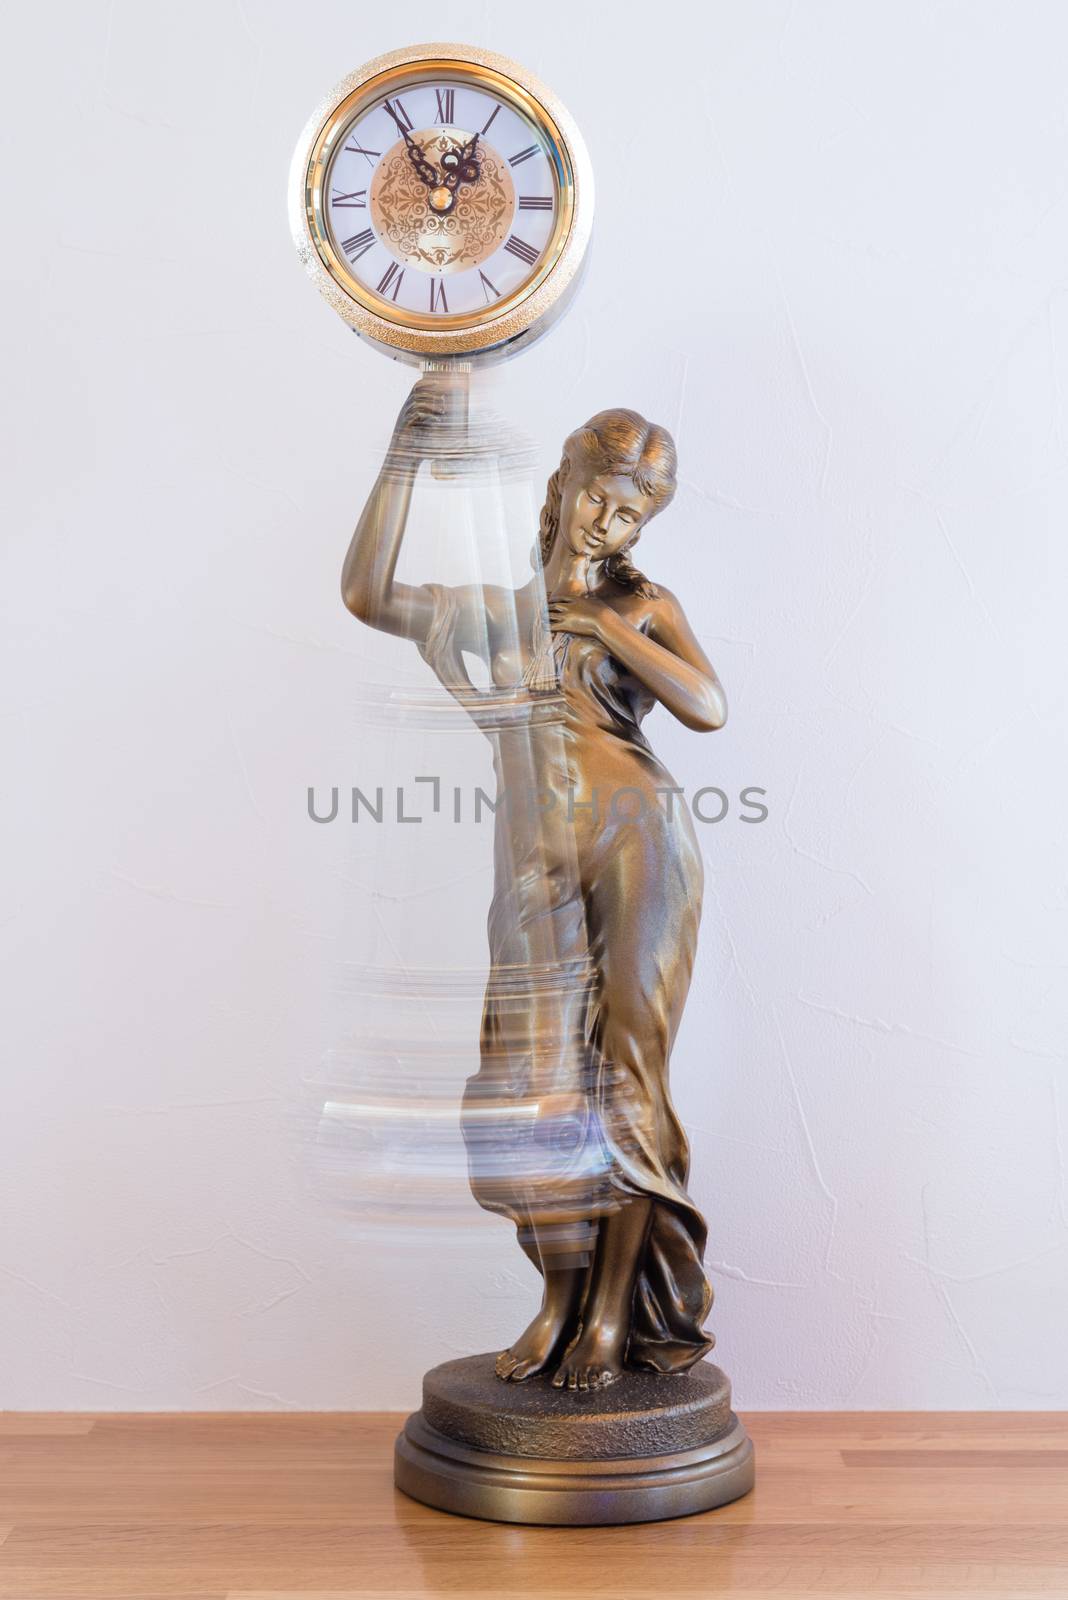 A classic looking bronze statue clock with a swinging pendulum.